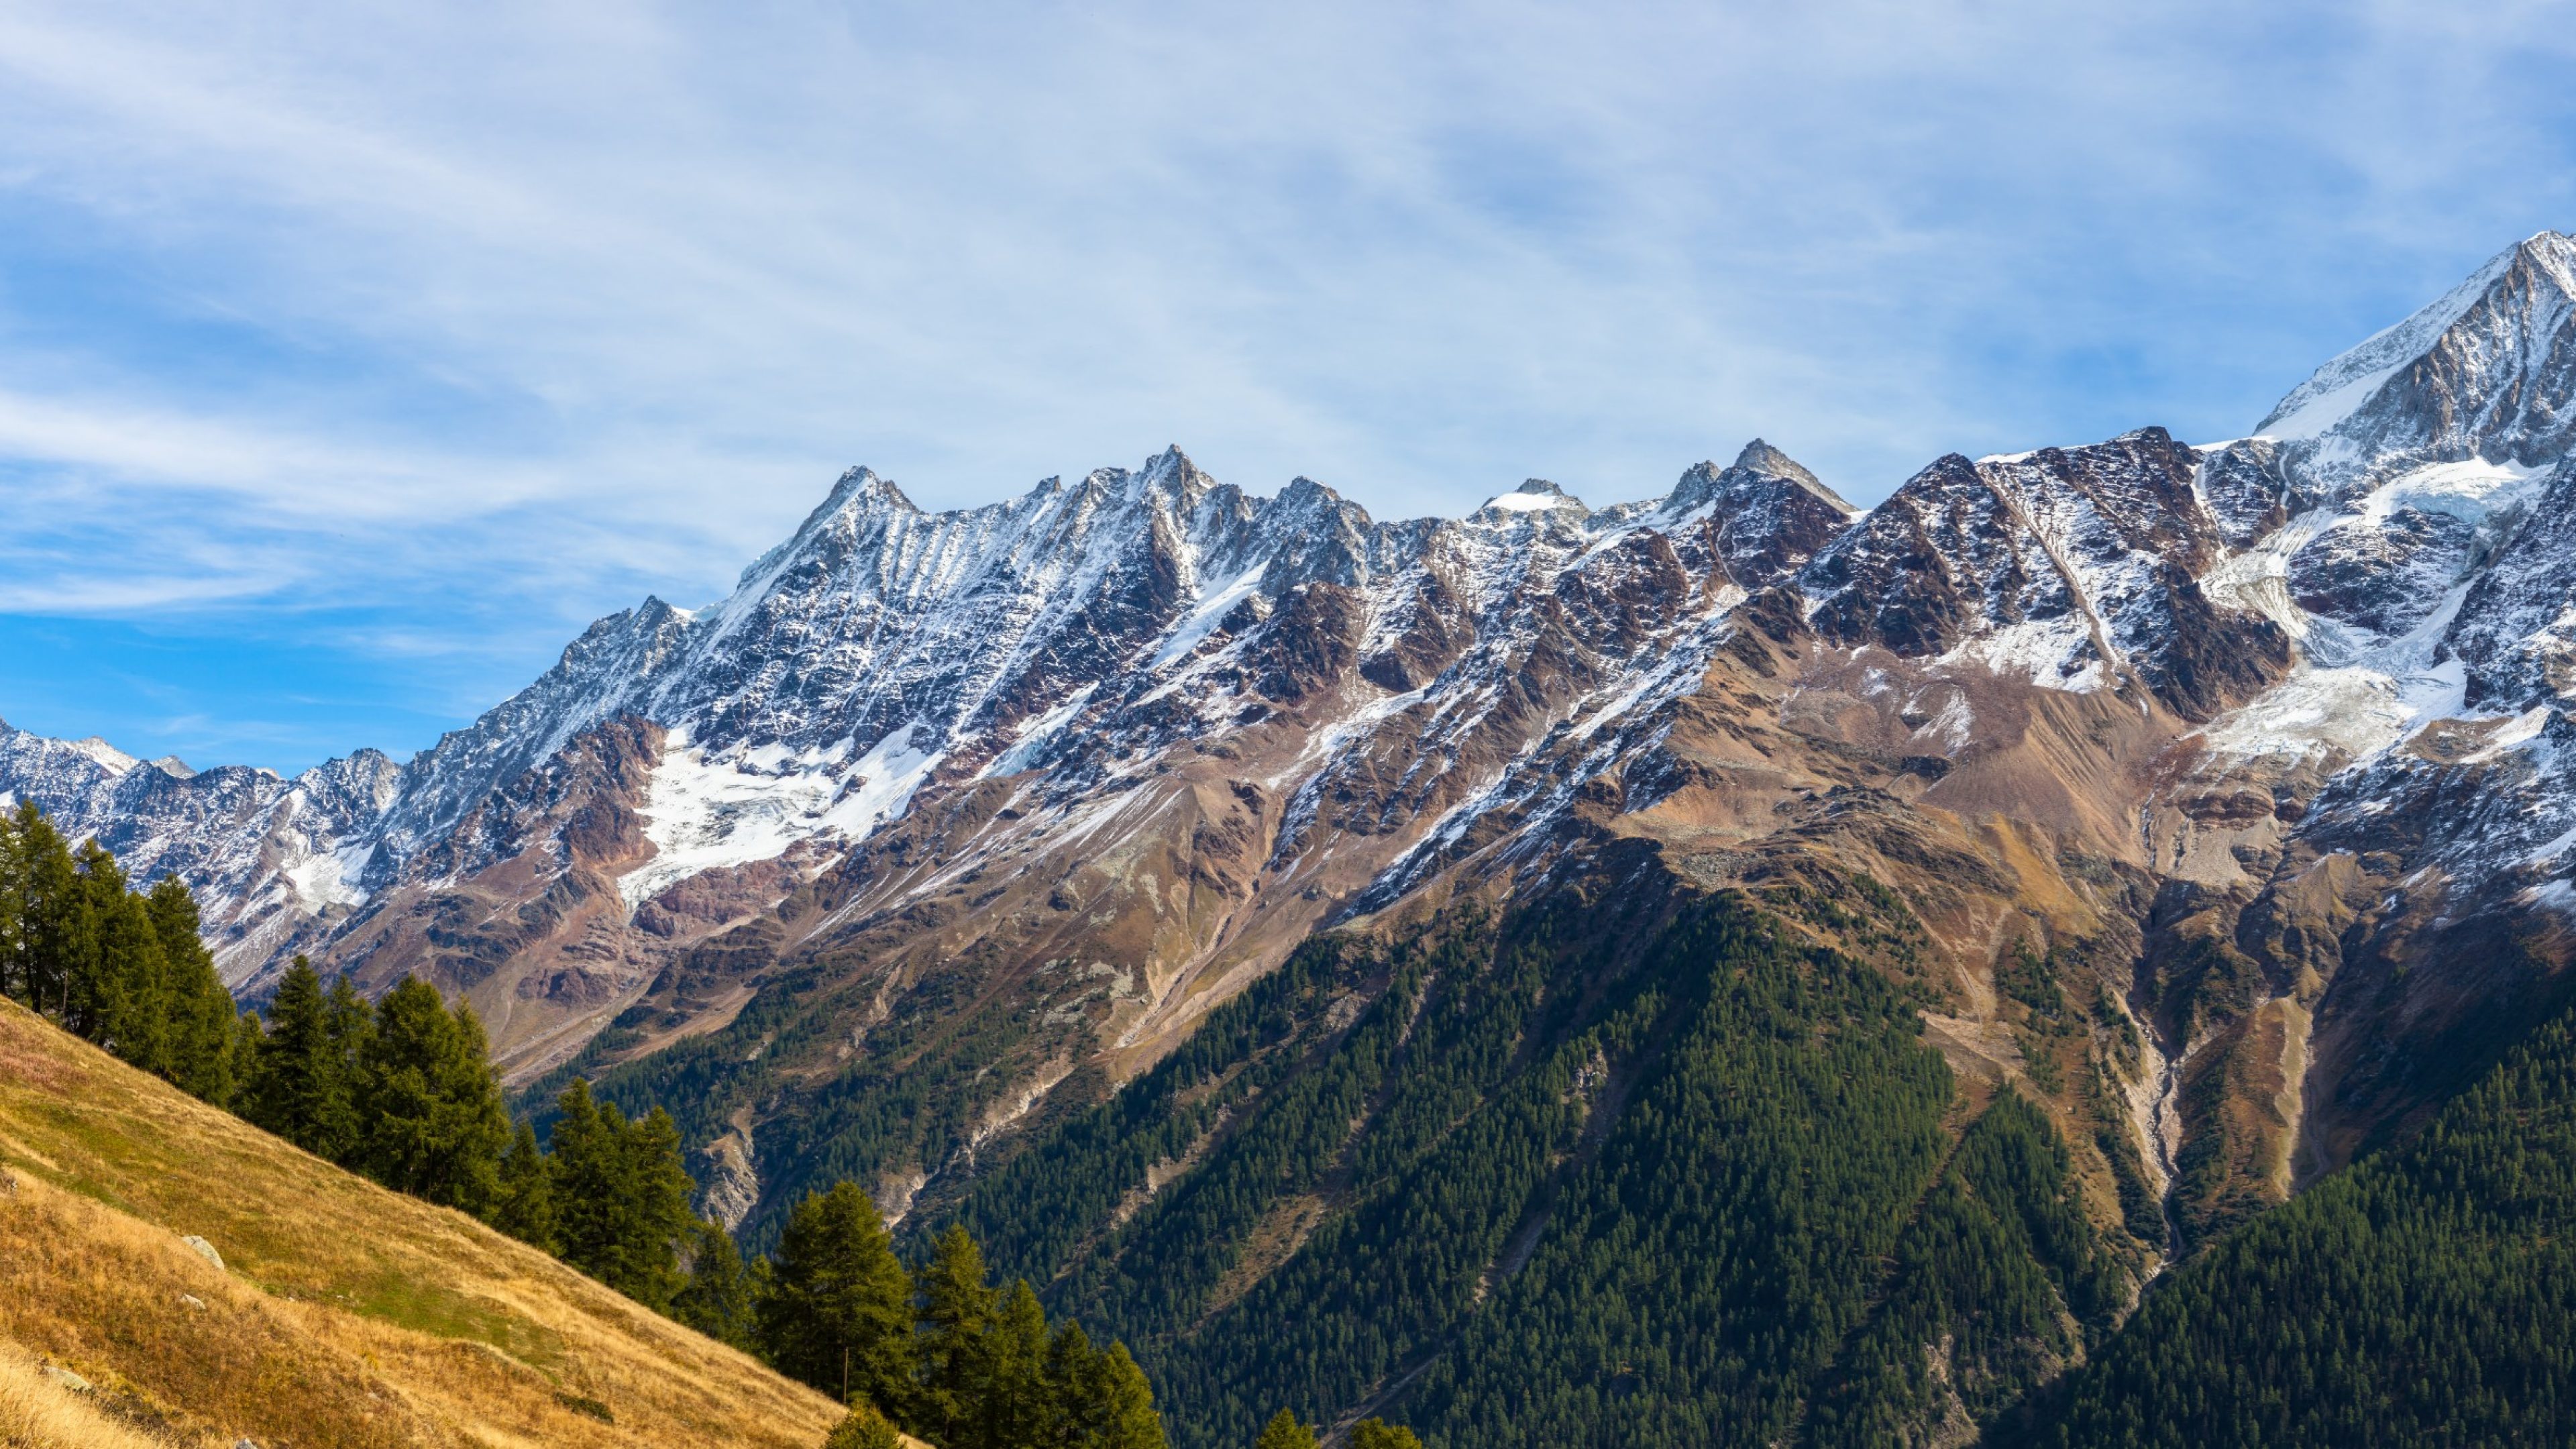 Panorama view of the Bietschhorn and mountain range of alps in canton of Valais from the hiking path above the Loetschental valley, Switzerland.